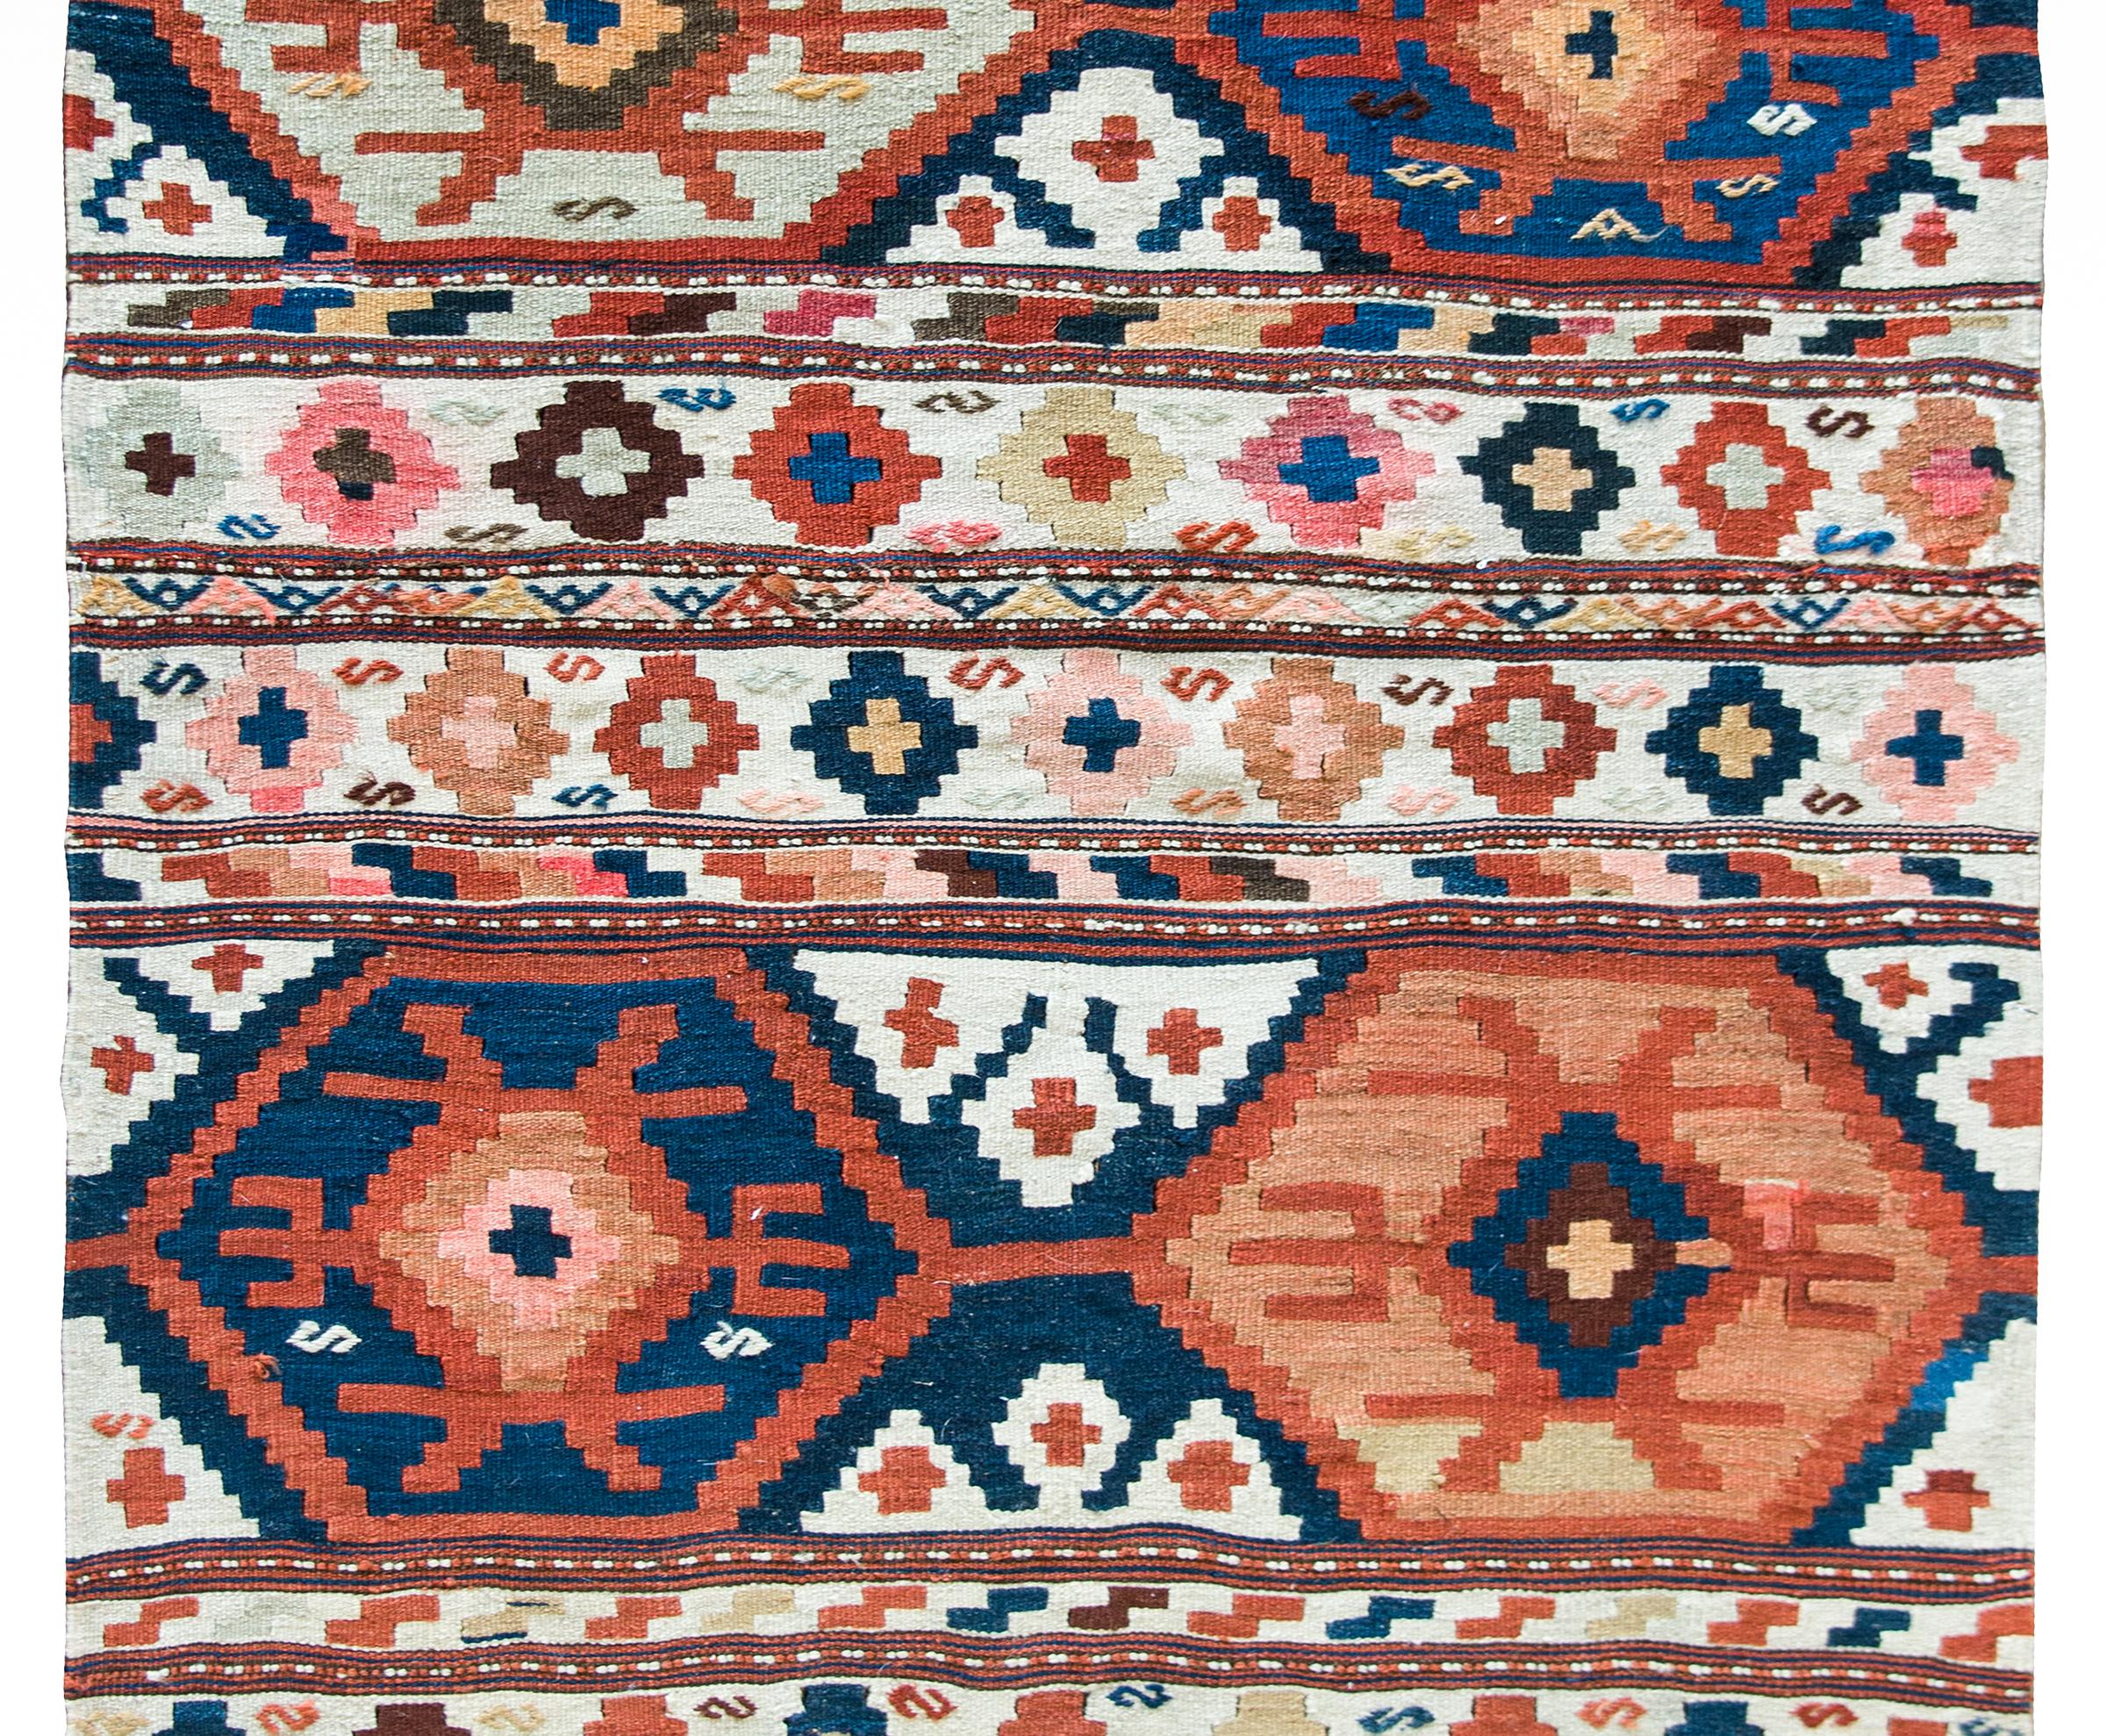 A beautiful early 20th century Persian Azari Kilim rug with four large geometric stylized flowers amidst a field of more stylized flowers arranged into stripes across the field, and solid colored stripes at each end.